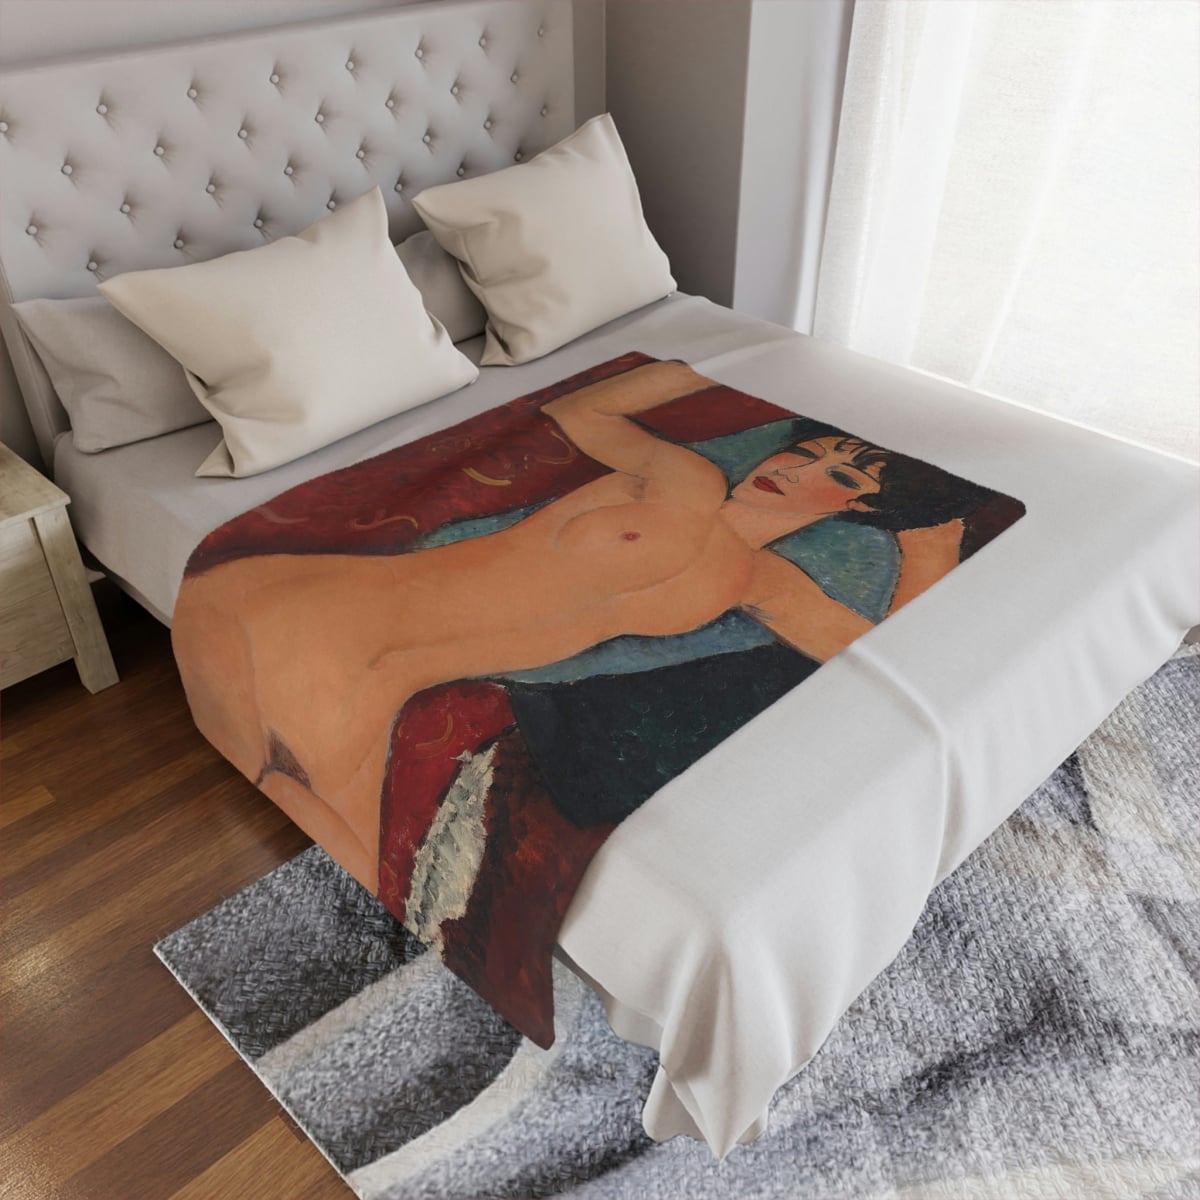 Amedeo Modigliani-inspired blanket adding style to a living space